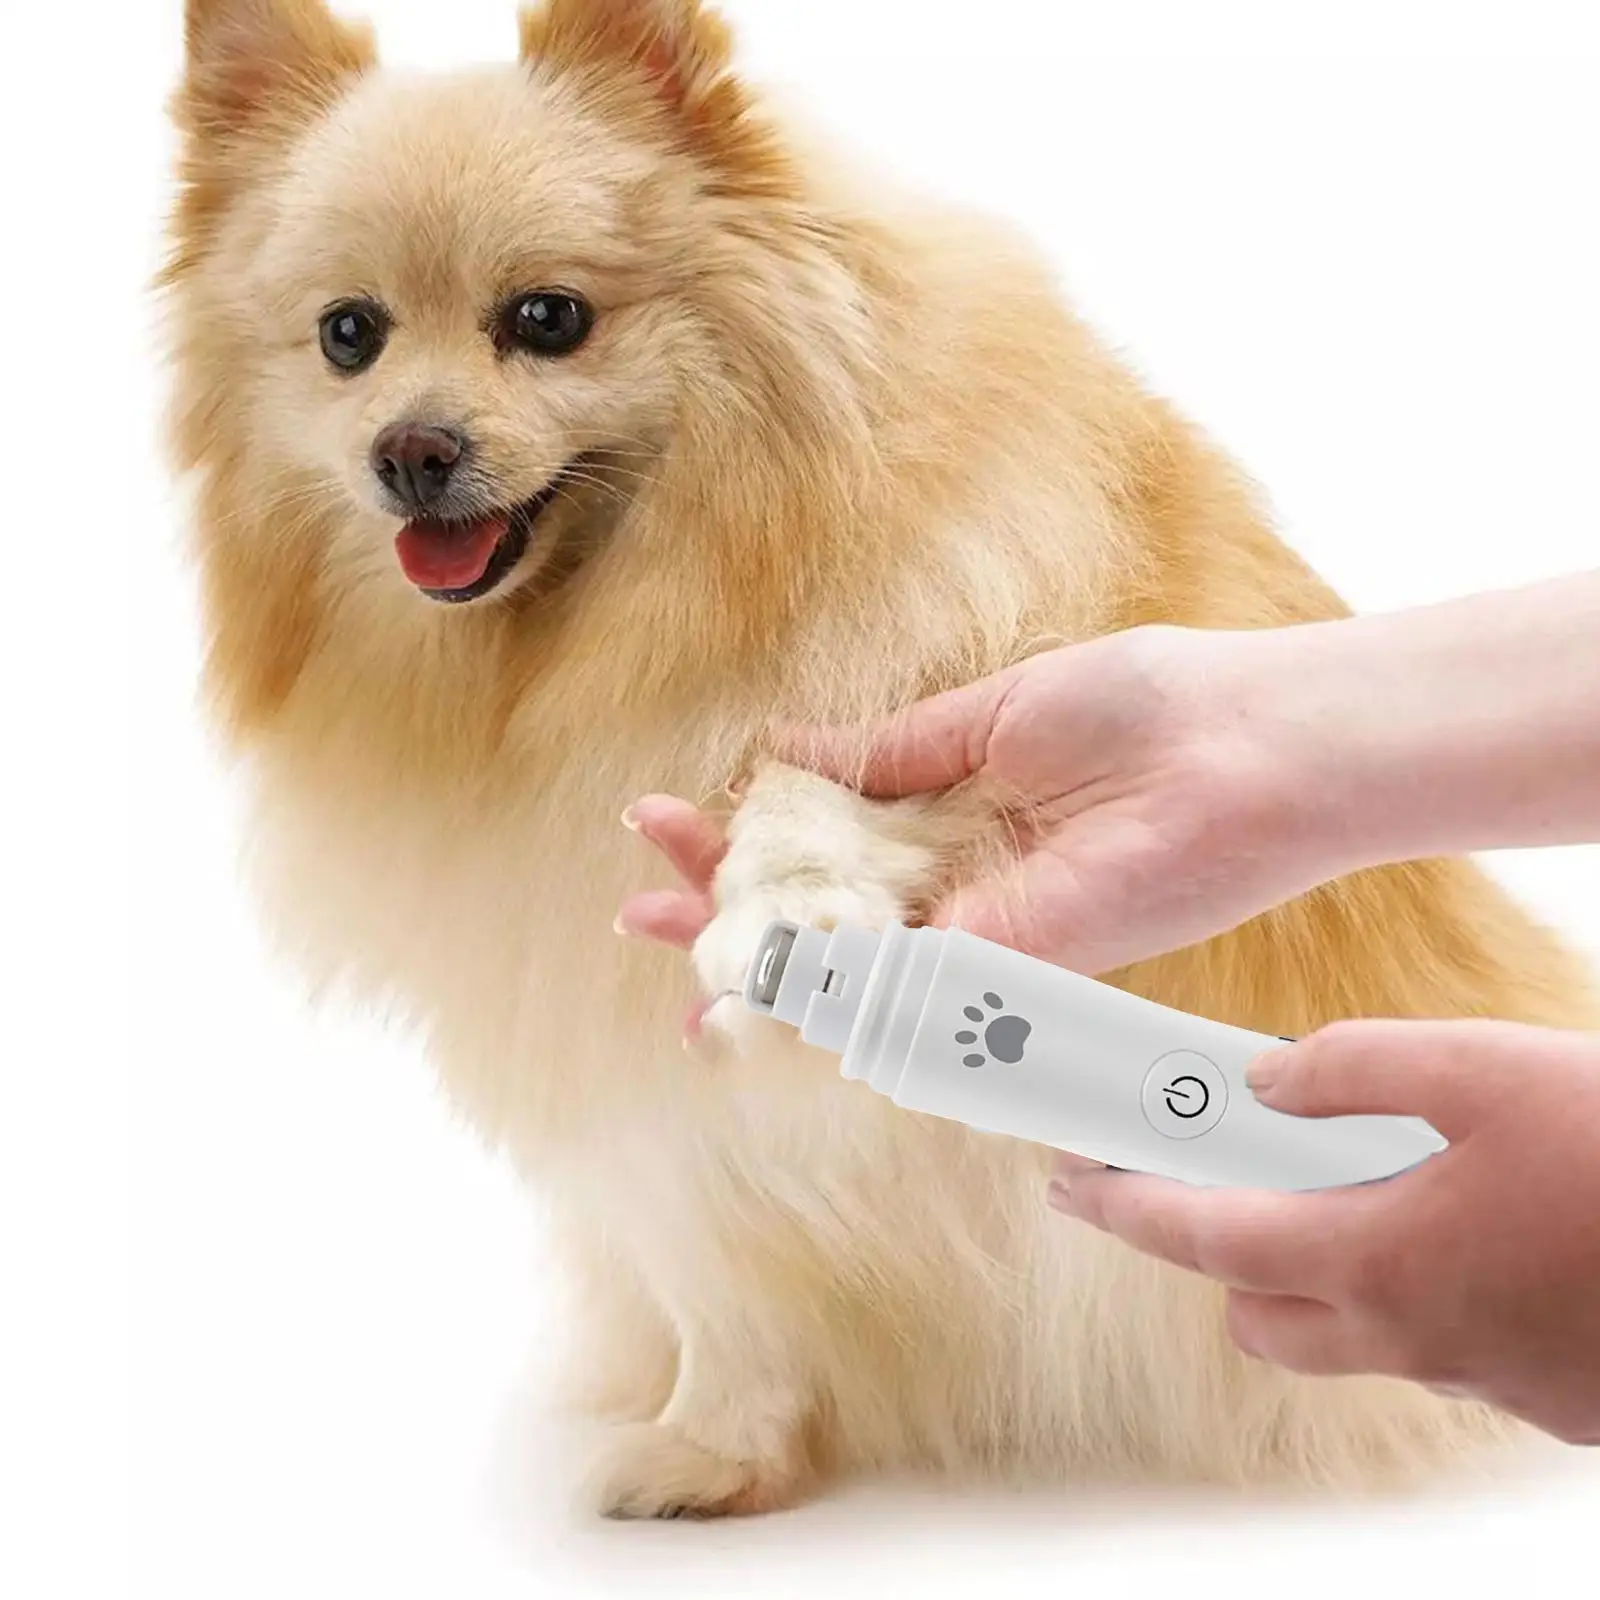 Pet Nail Grinder USB Rechargeable 3 Speeds Quiet Painless Dog Cat Nail Grinder Nail Polish for Small Medium Large Dogs and Cats